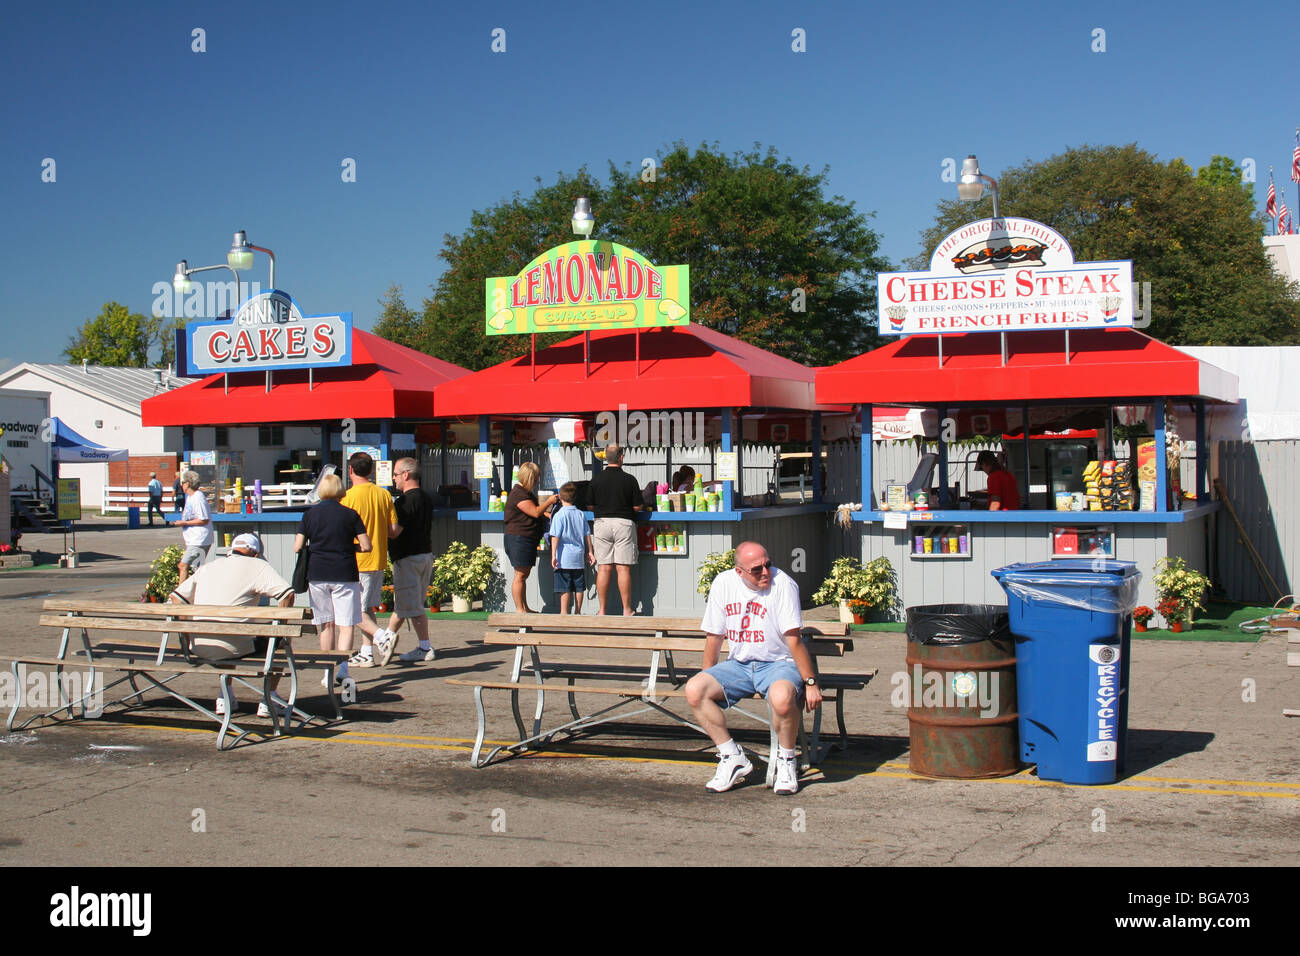 Food Vendor Stands at Ohio State Fair. Columbus, Ohio, USA. Trash and Recycle bins visible at right. Stock Photo